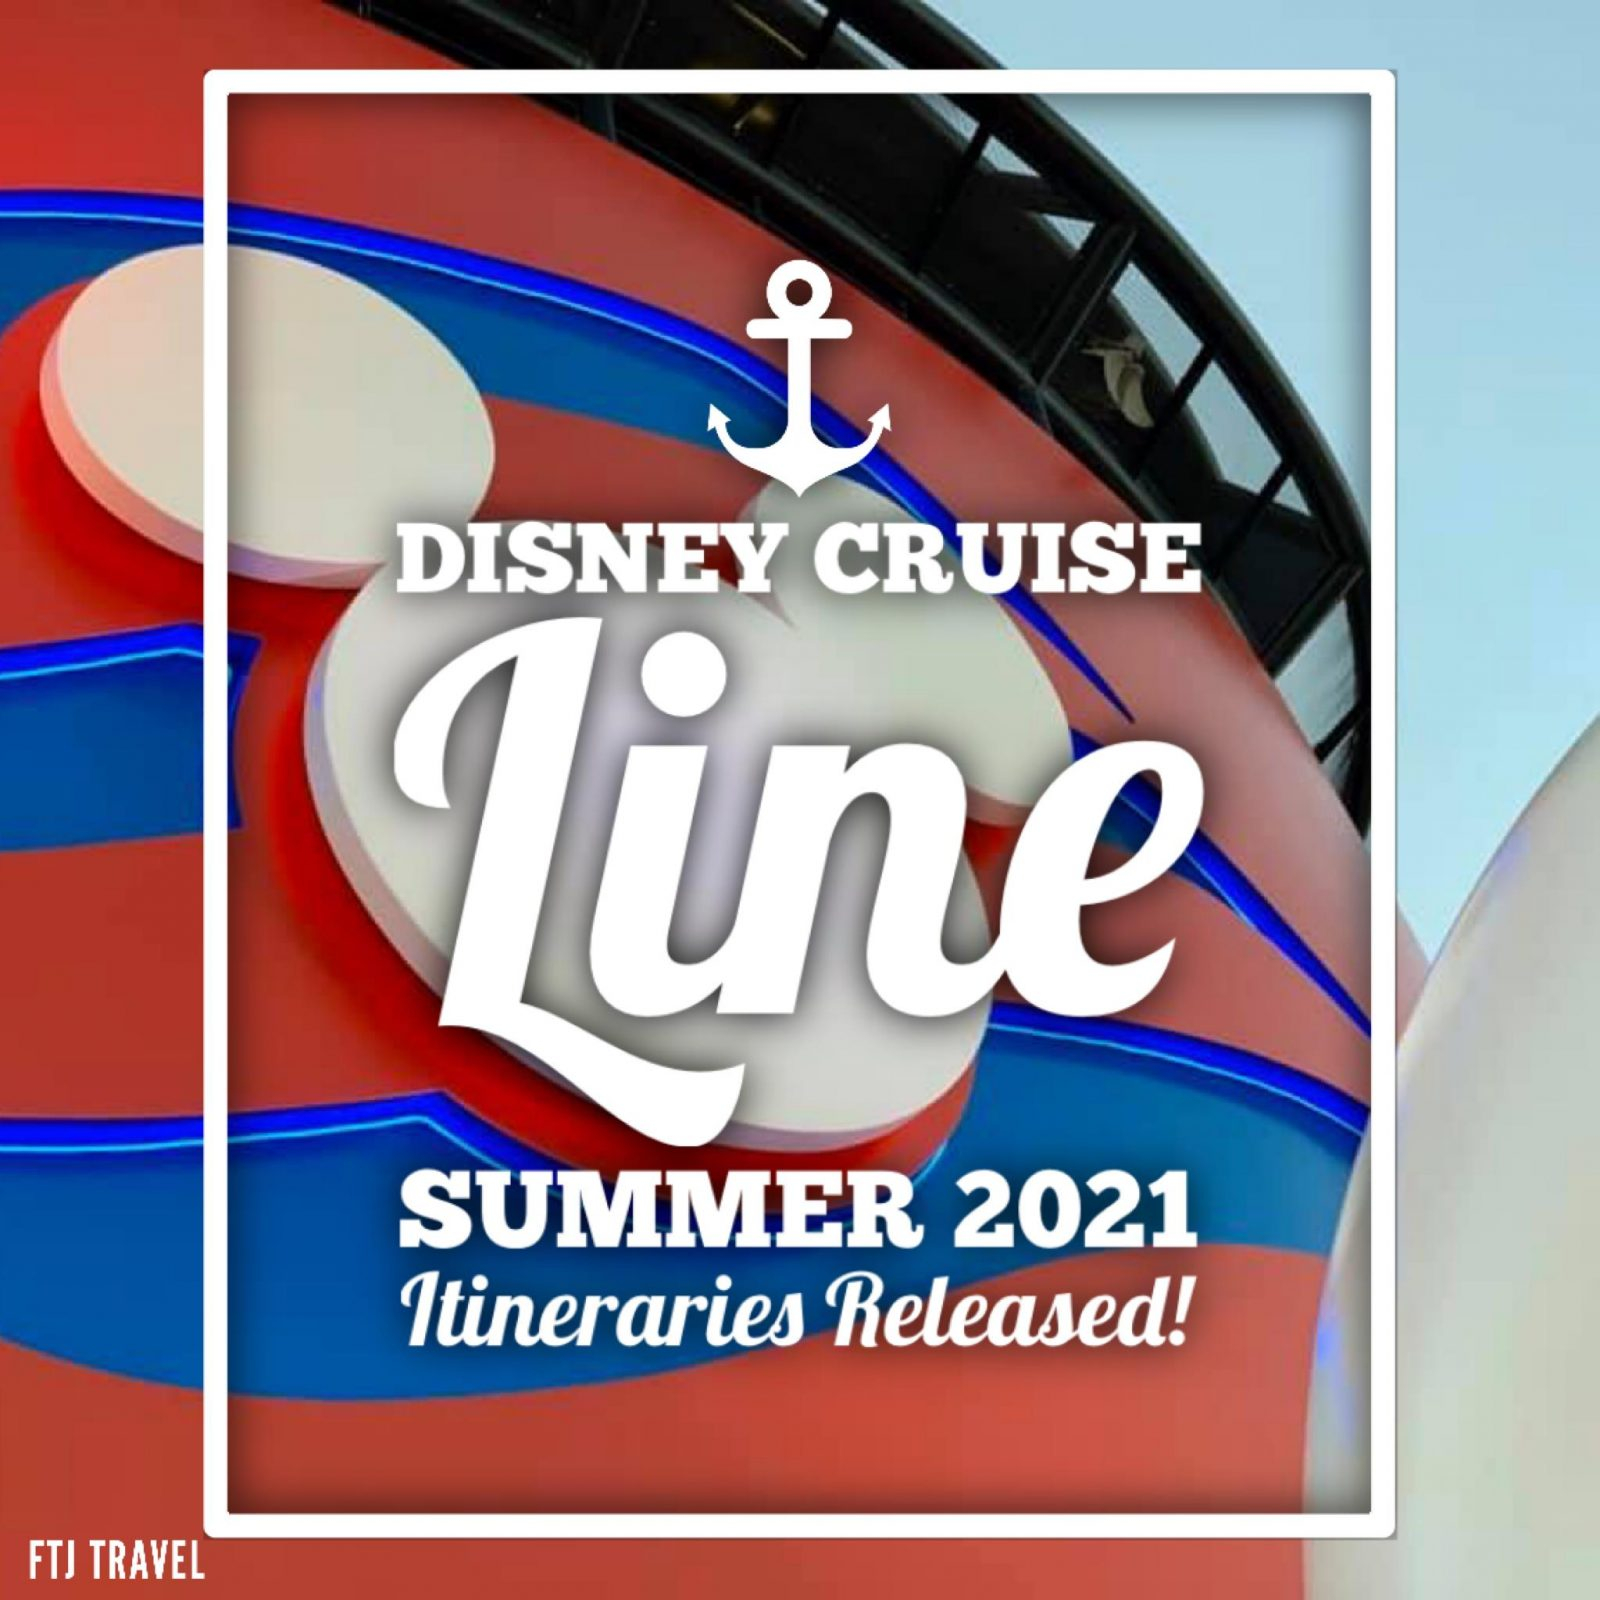 Disney Cruise Line Summer 2021 Itineraries Released! | Fairytale Journeys Travel